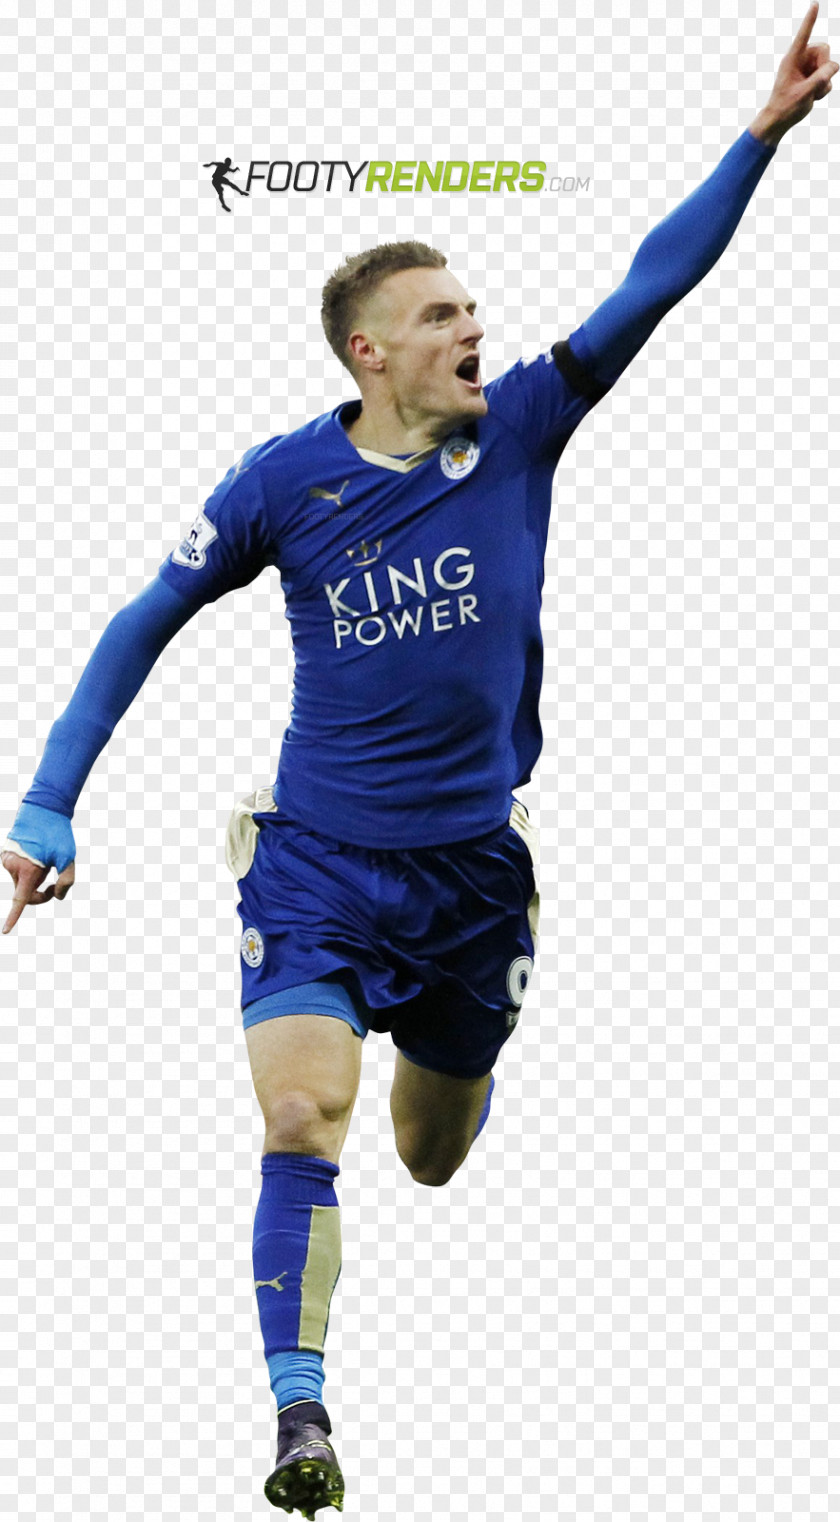 Jamie Vardy Leicester City F.C. A.S. Roma Football Player S.S.C. Napoli PNG